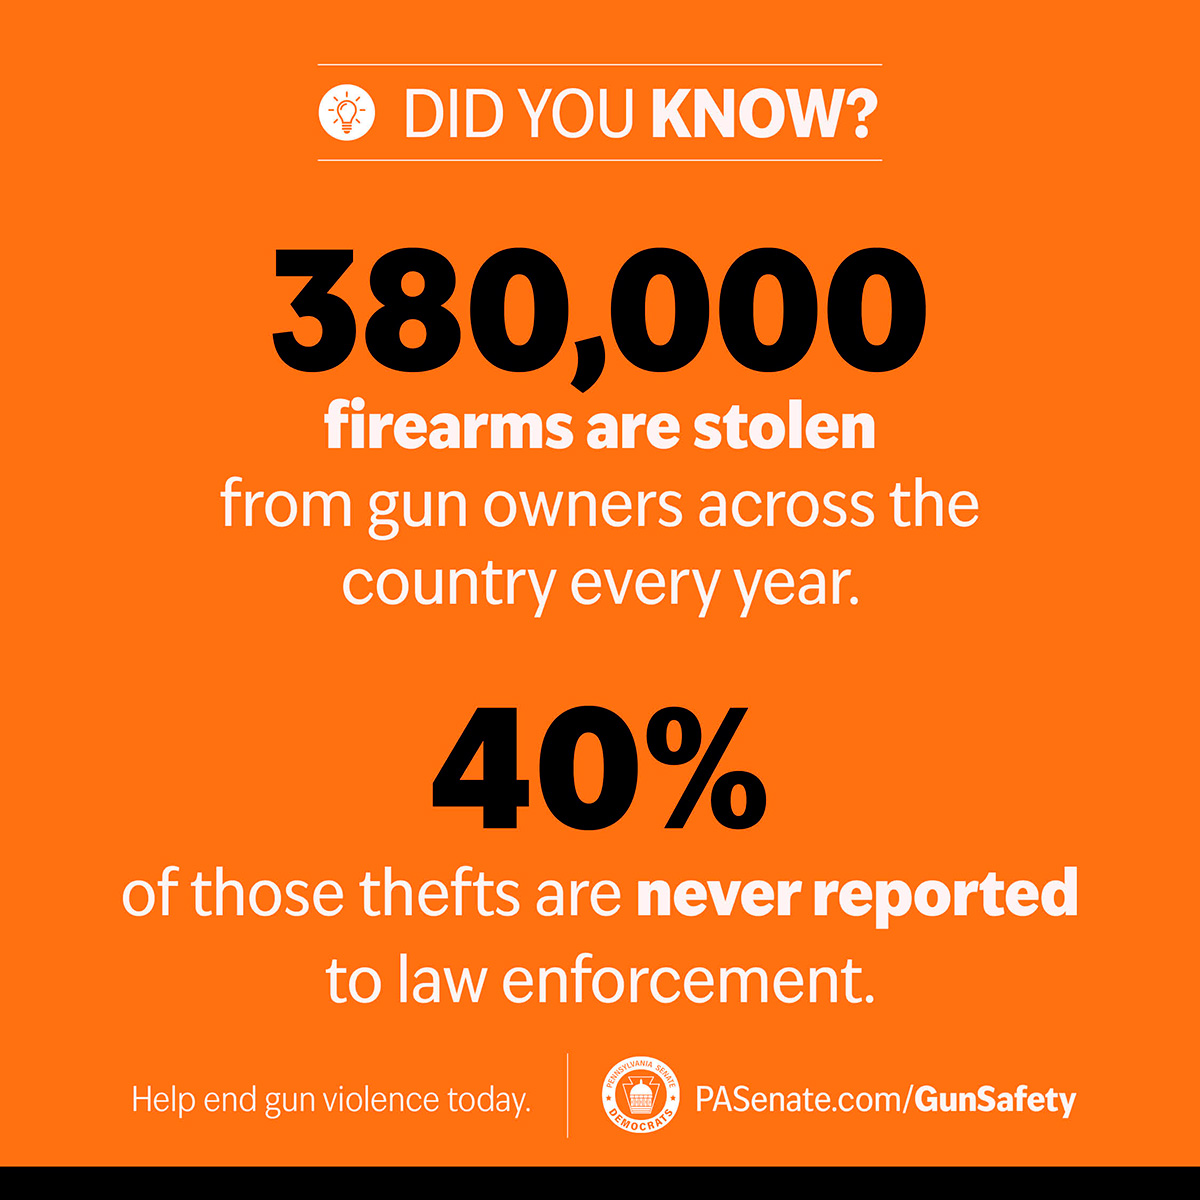 Did you know? 380,000 firearms are stolen form gun owners across the country every year.